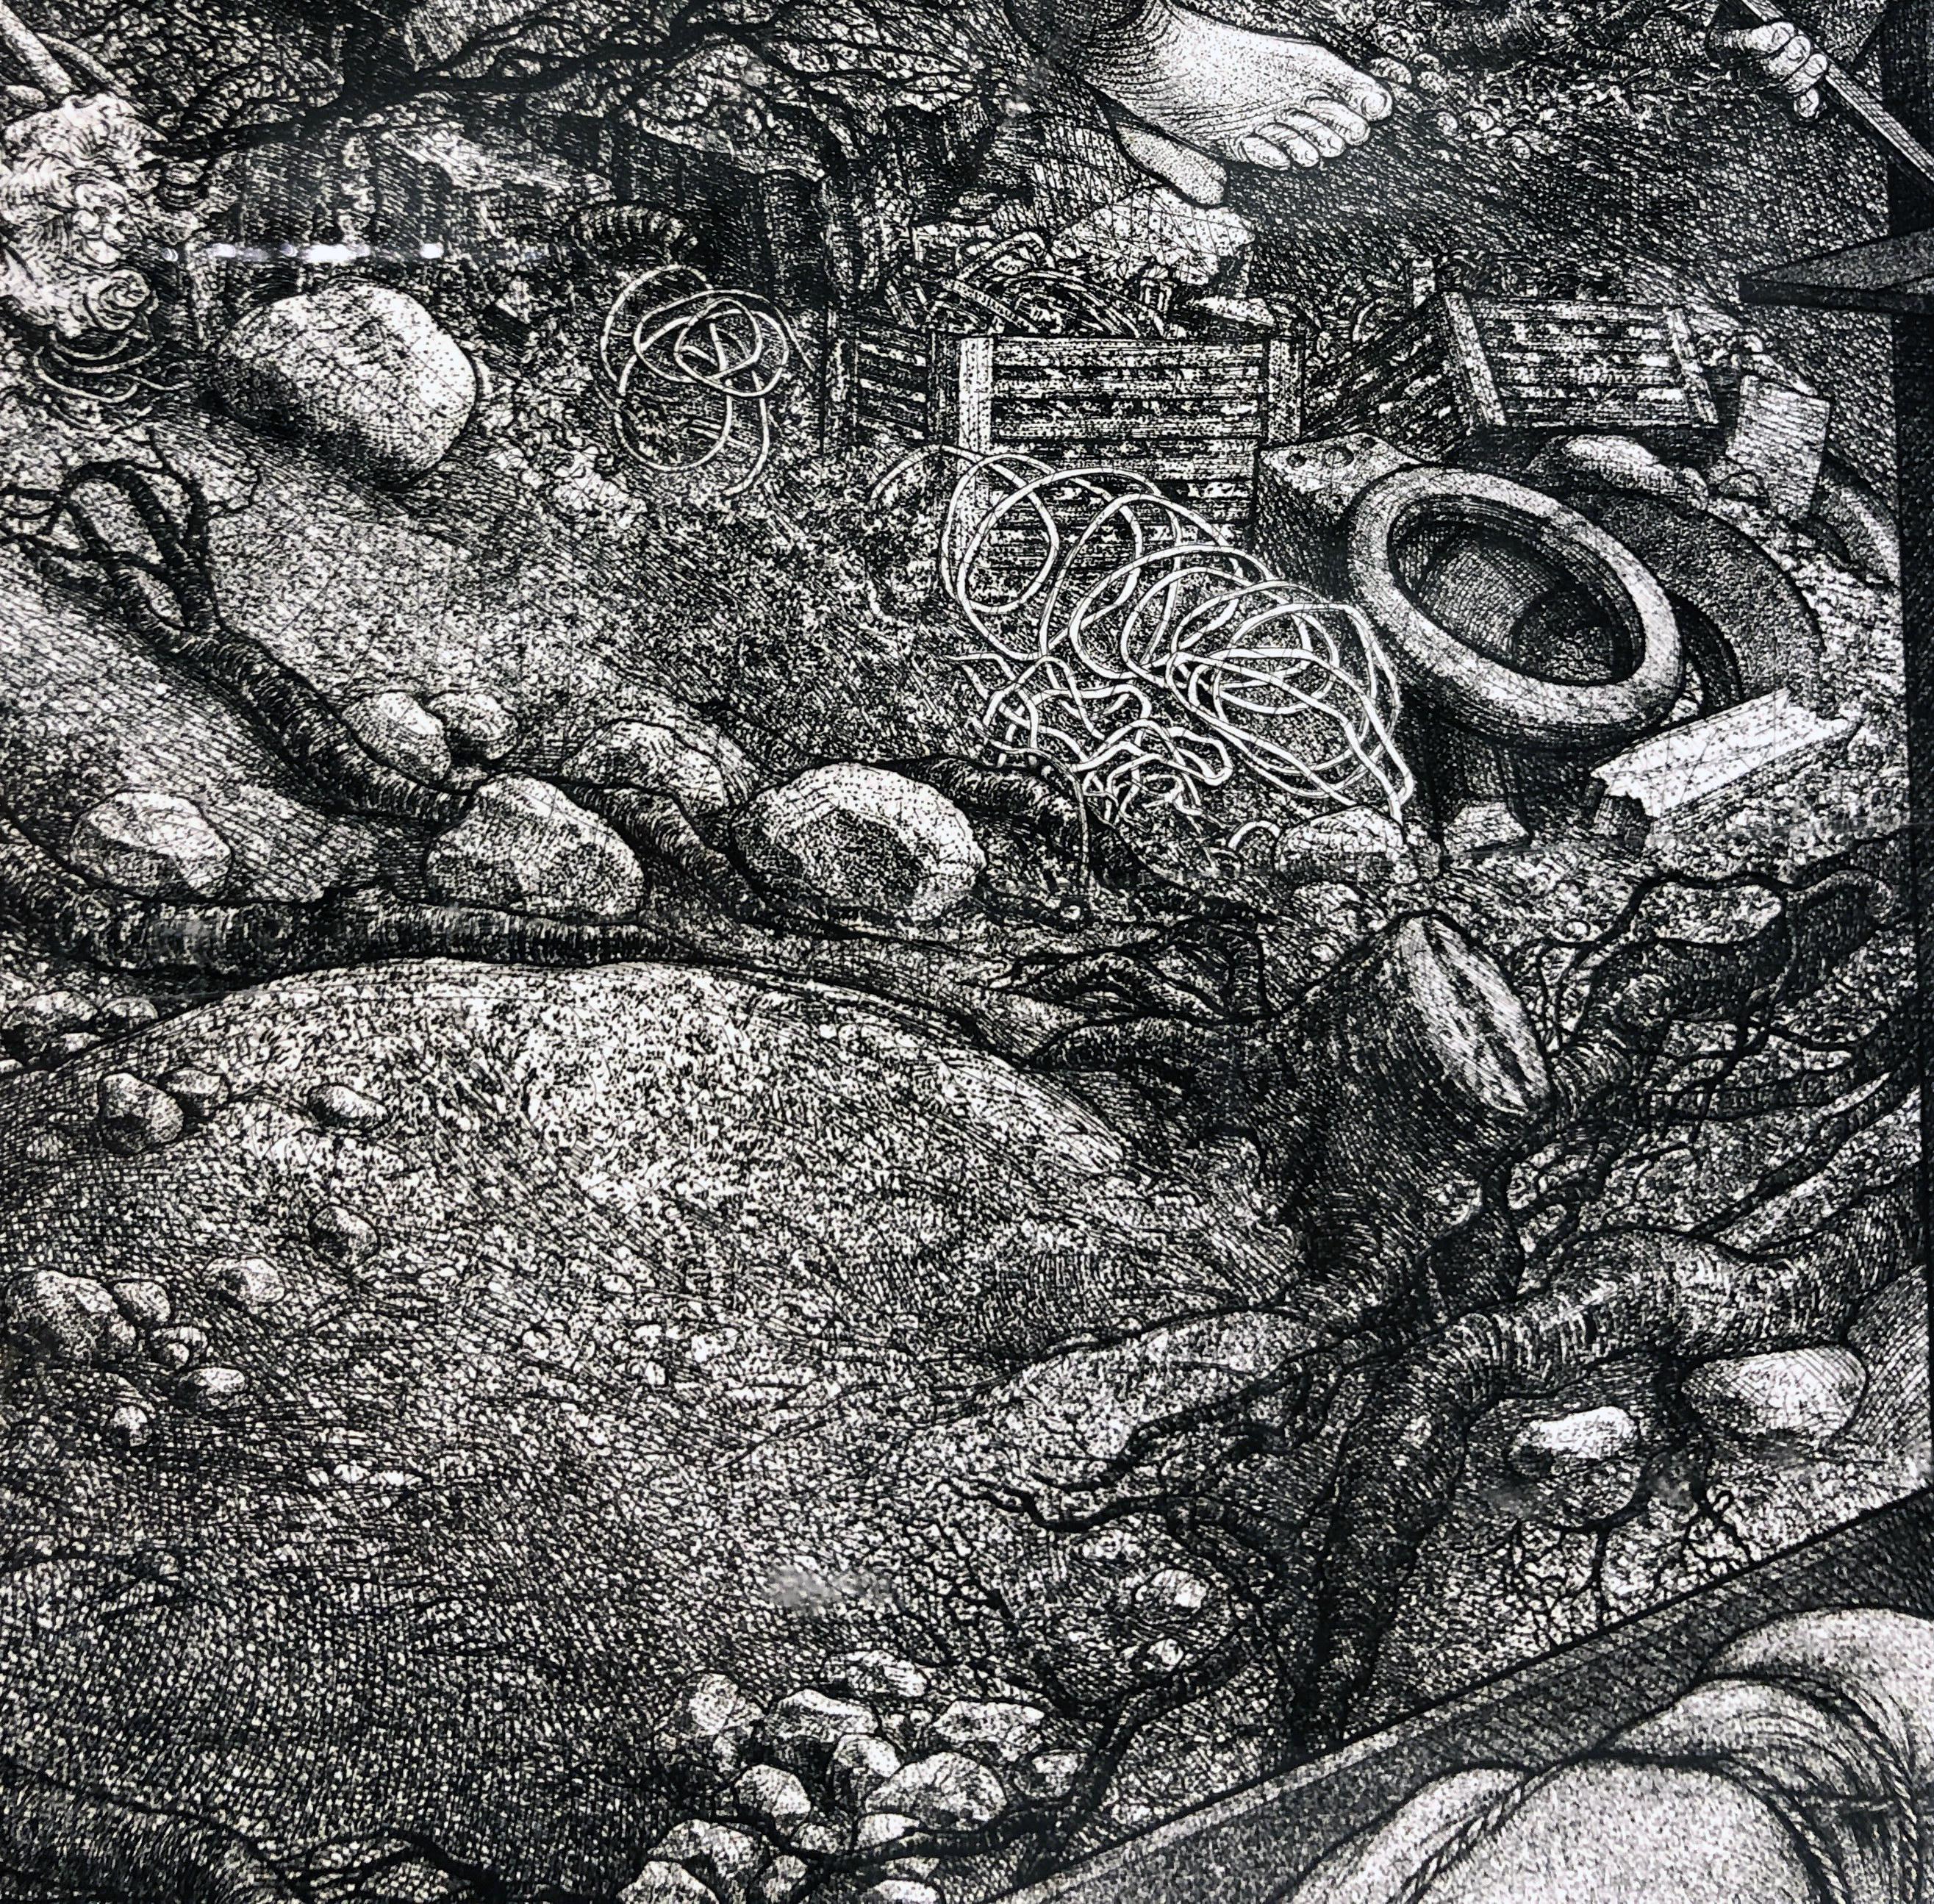 Monuments - Highly Detailed Allegorical, Surreal Etching with Multiple Figures - Black Nude Print by David Becker